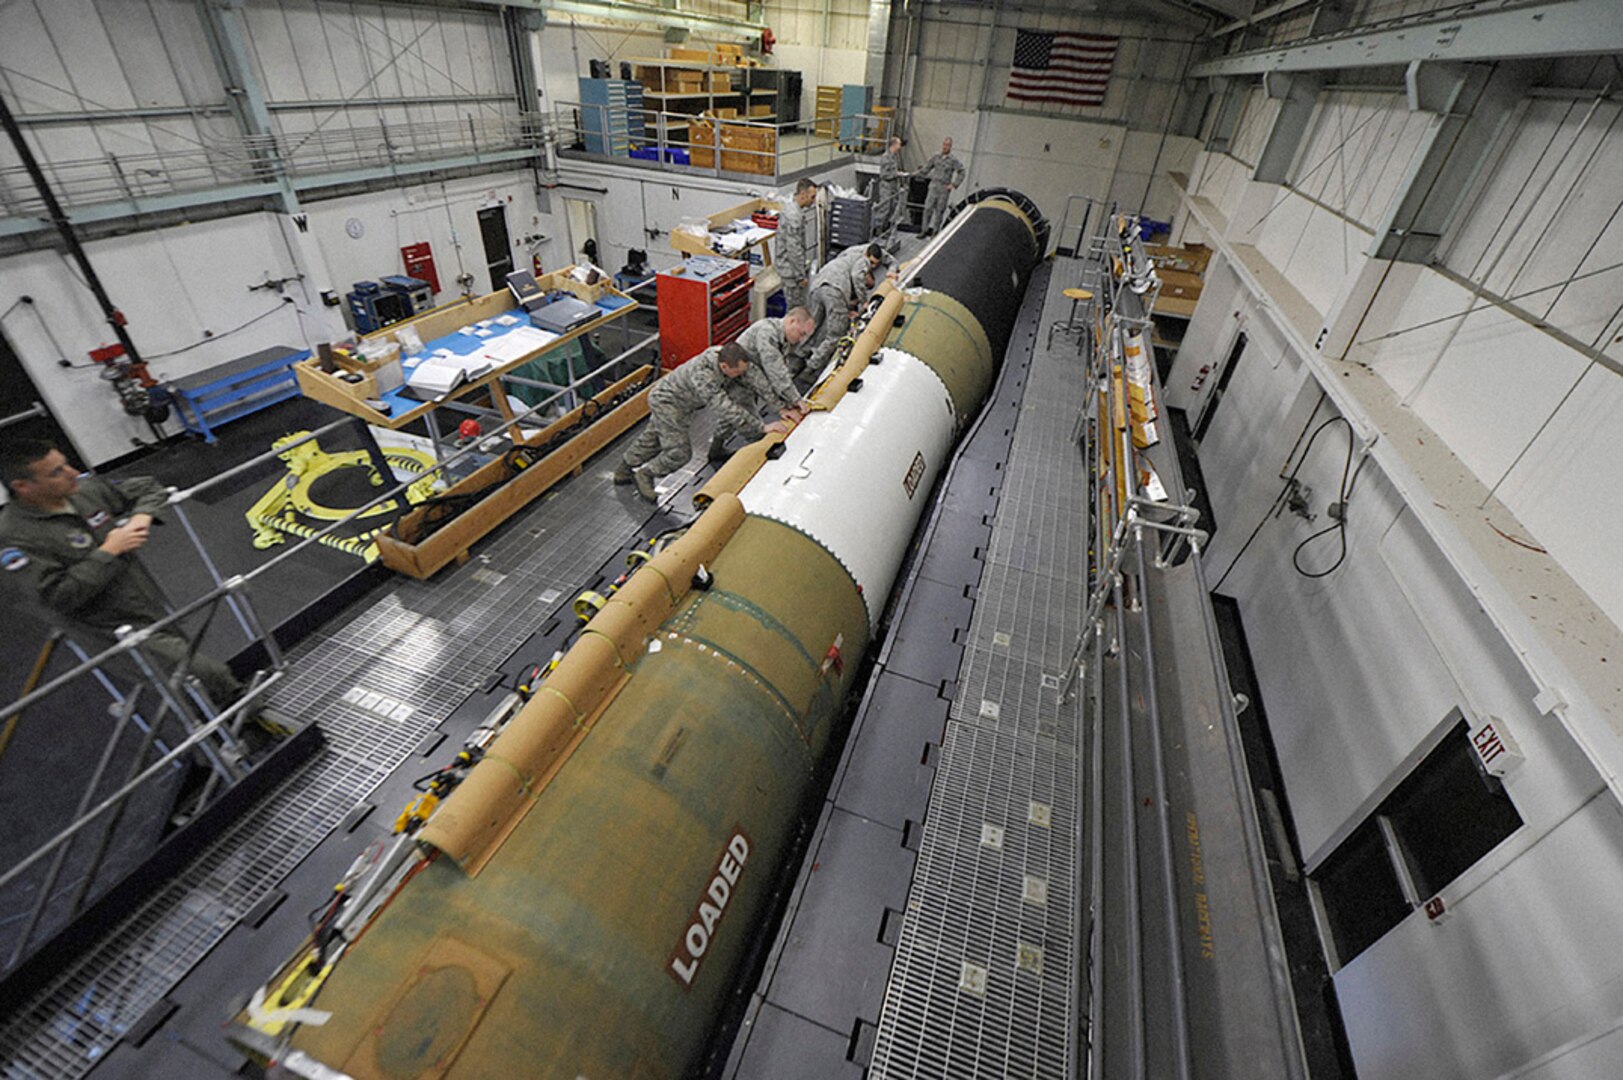 A 576th Flight Test Squadron Missile Handling Team installs a cable raceway on an Intercontinental Ballistic Missile at Vandenberg Air Force Base, California. DLA Aviation is working with the Air Force to improve its support of ICBM weapons systems. 